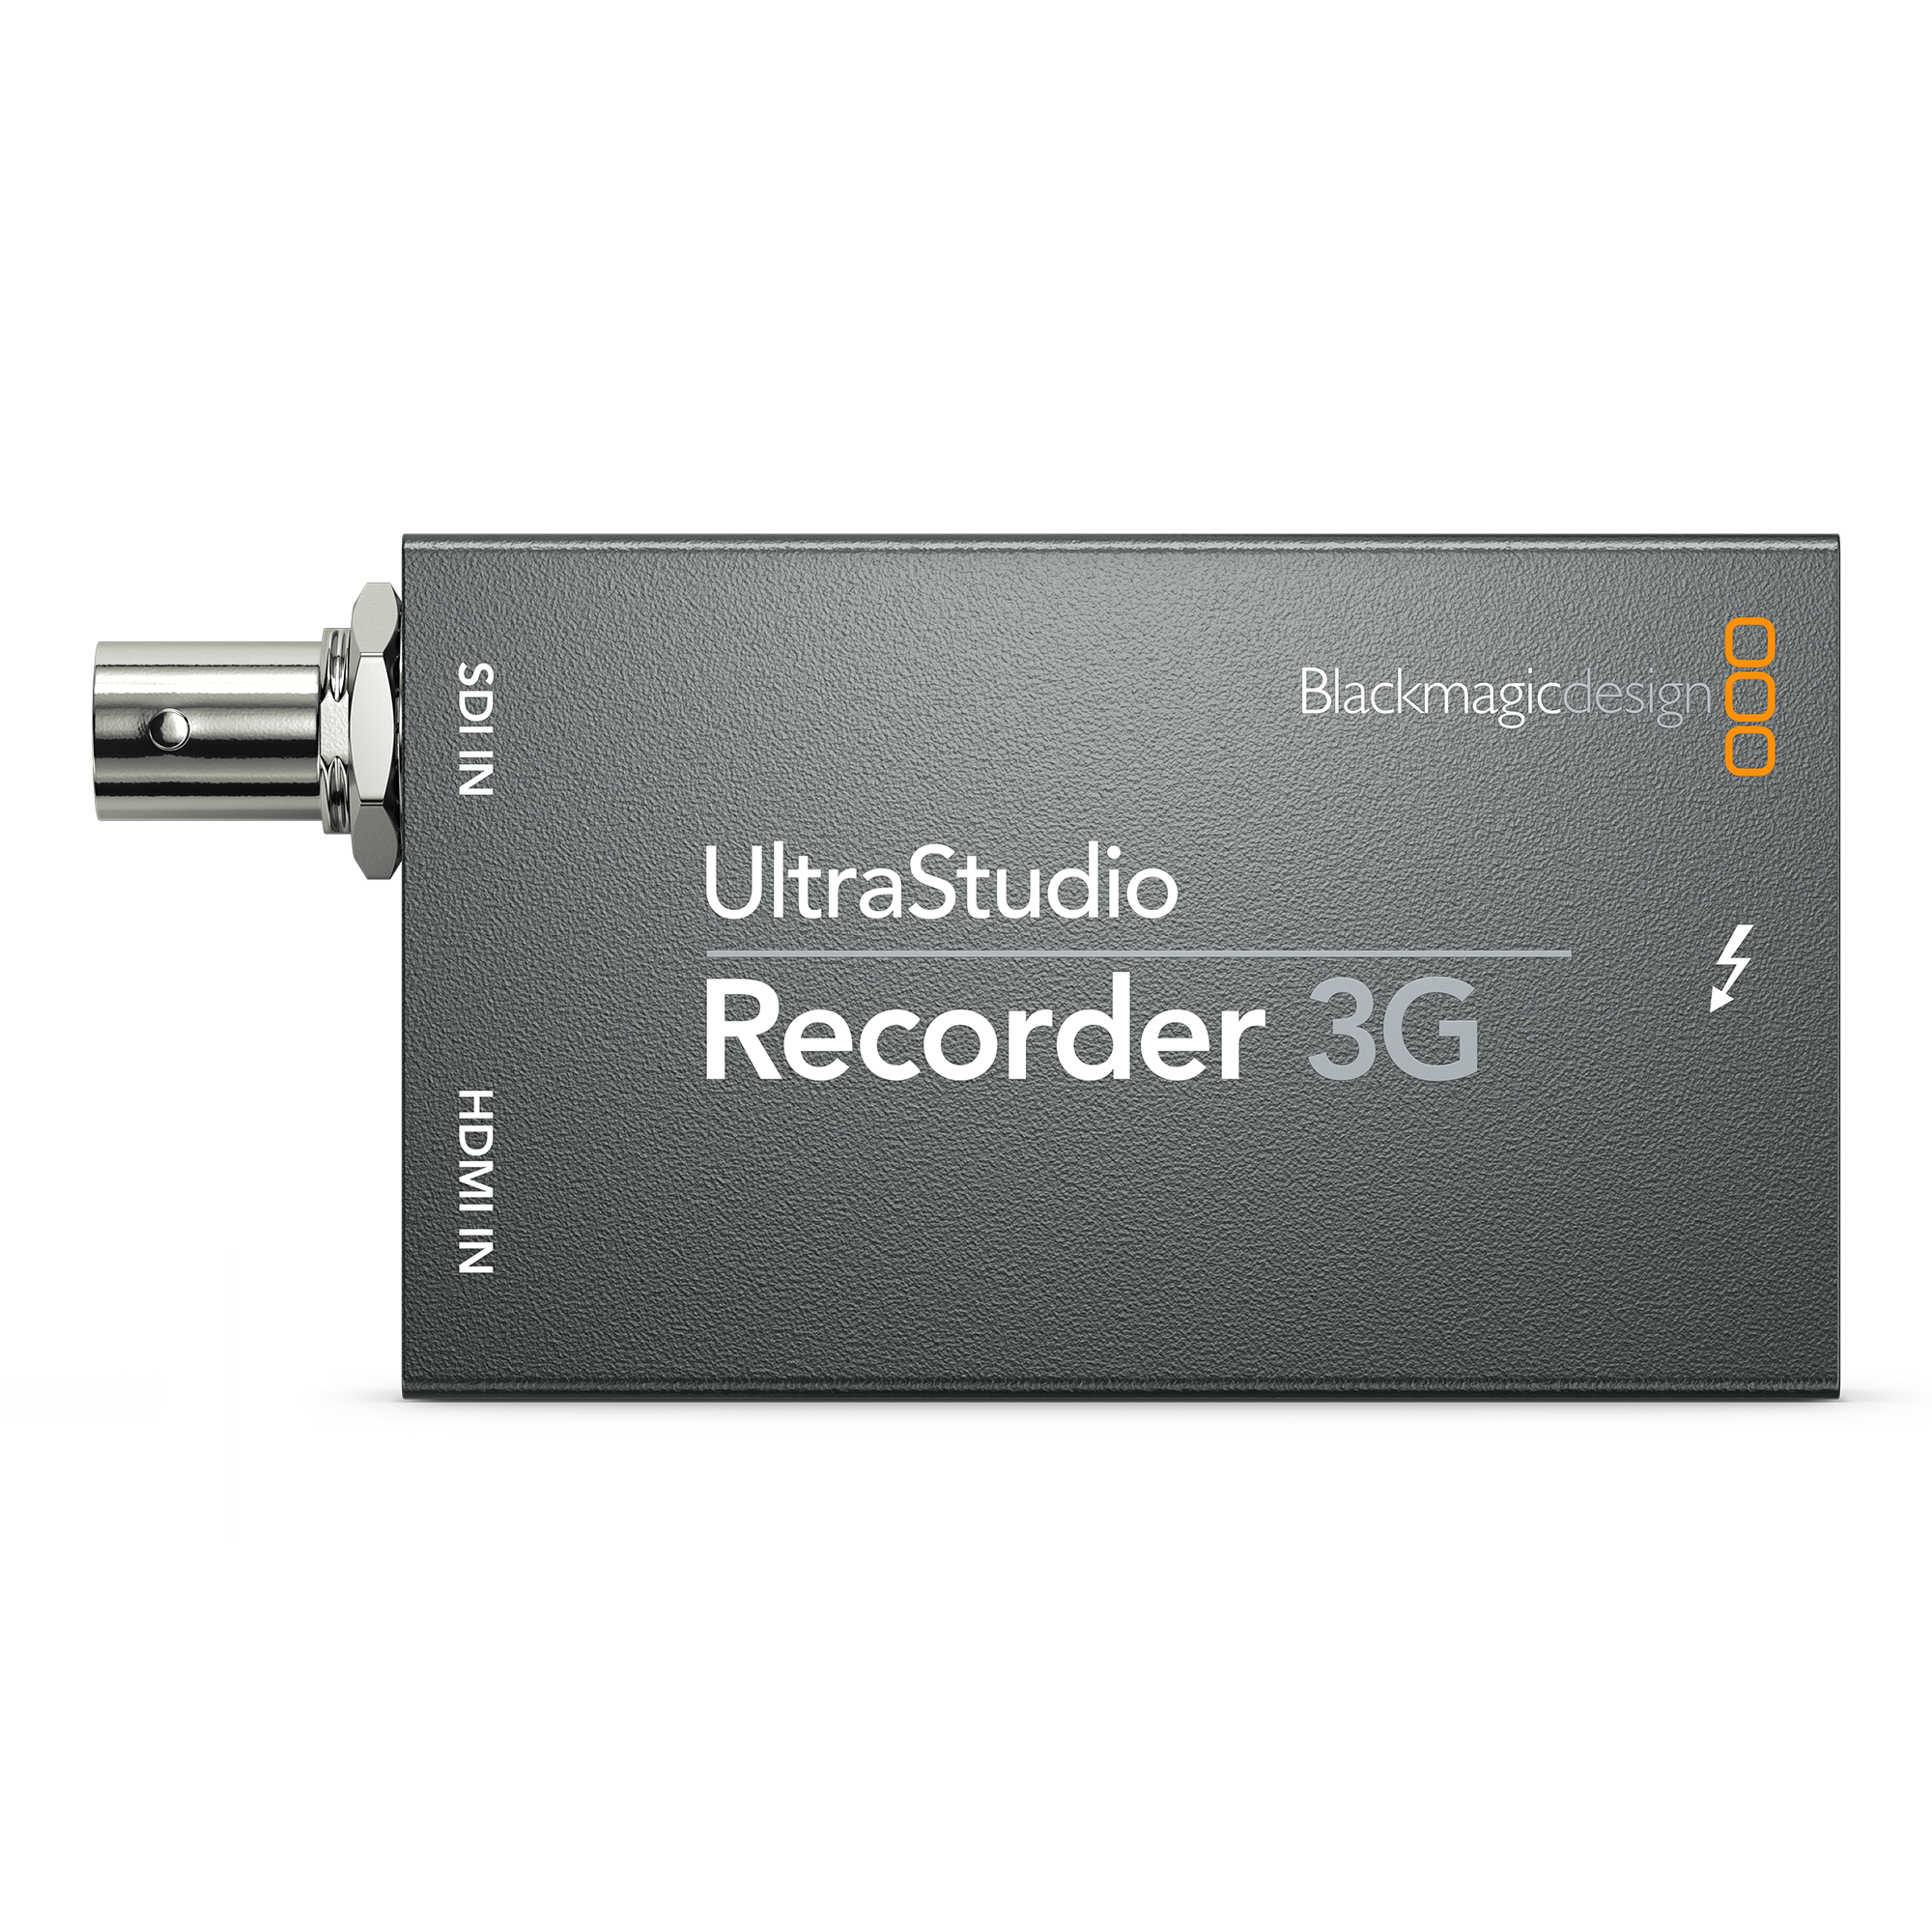 BlackMagic UltraStudio Recorder 3G (Thunderbolt 3 cable not included)